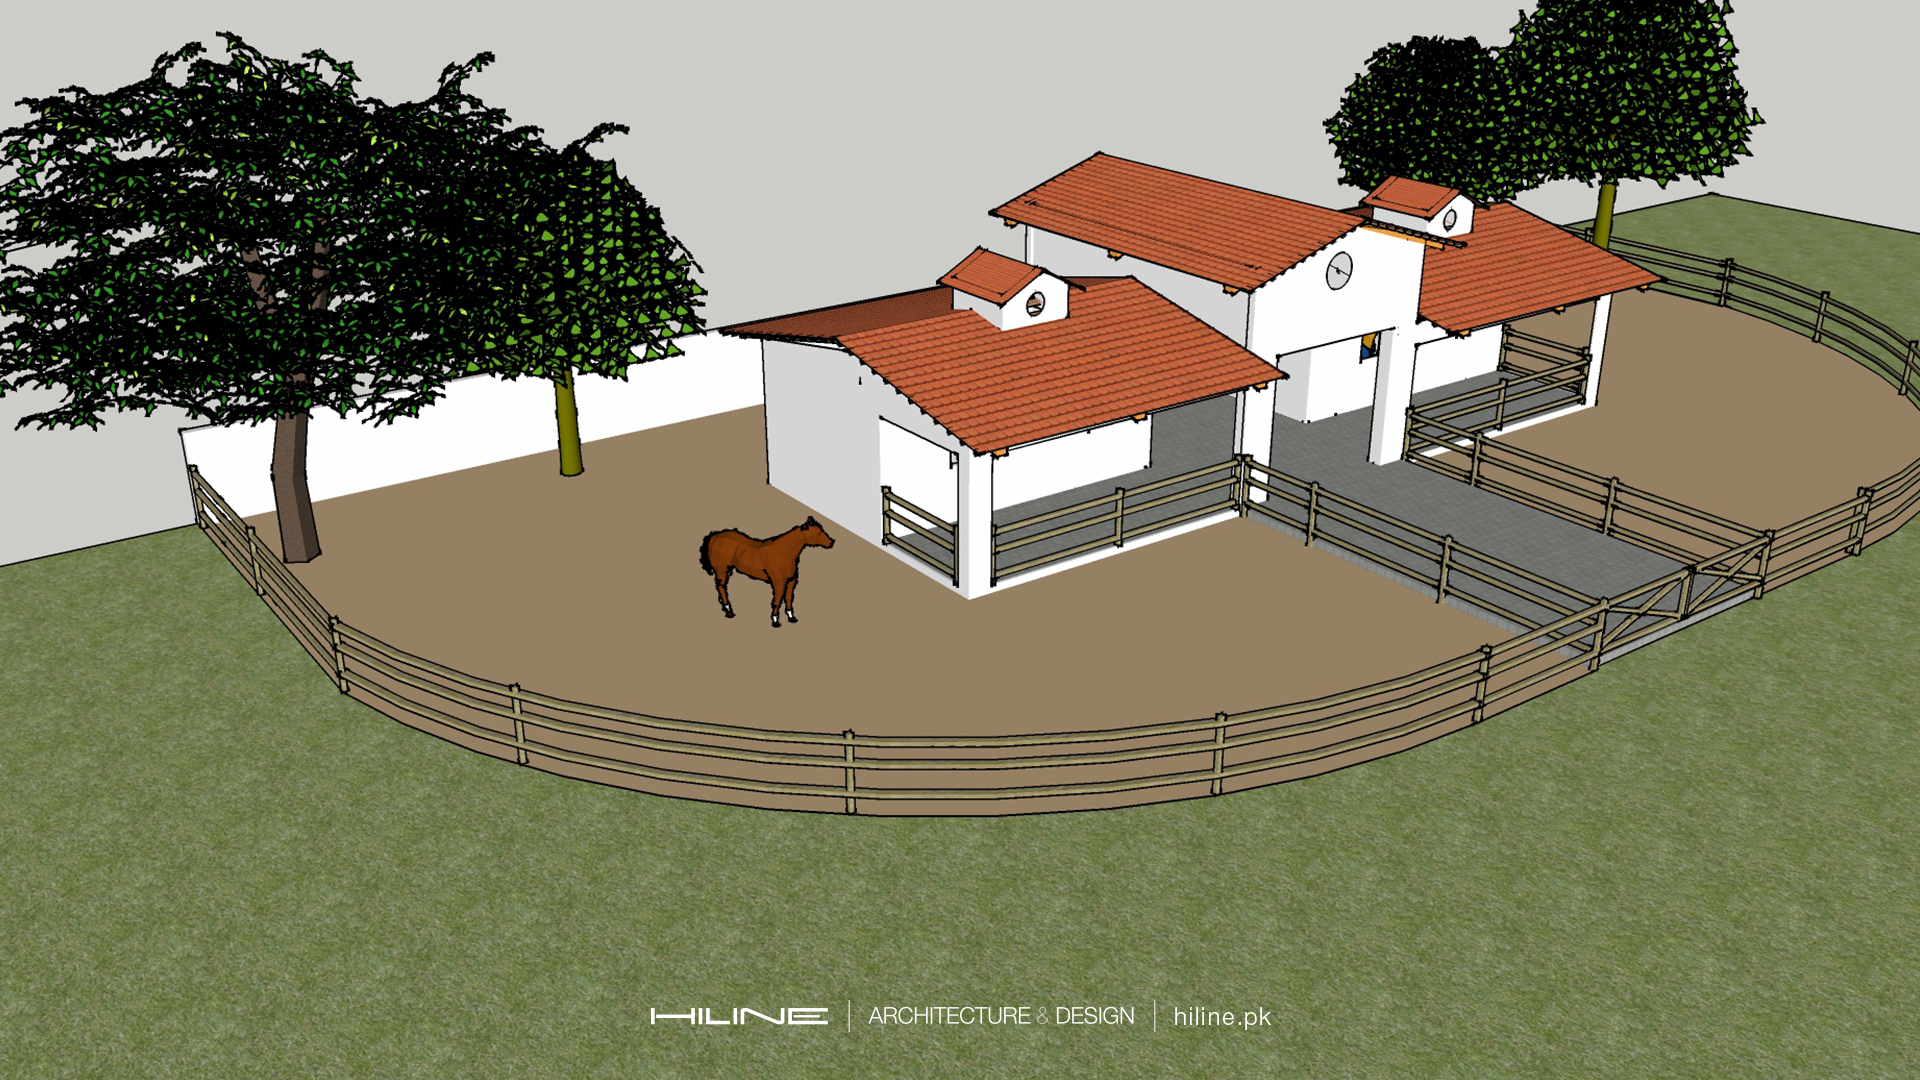 us-group-animal-farm-by-hiline-architects-interior-designer-3d-visualization-residential-commercial-building-design-Lahore-06